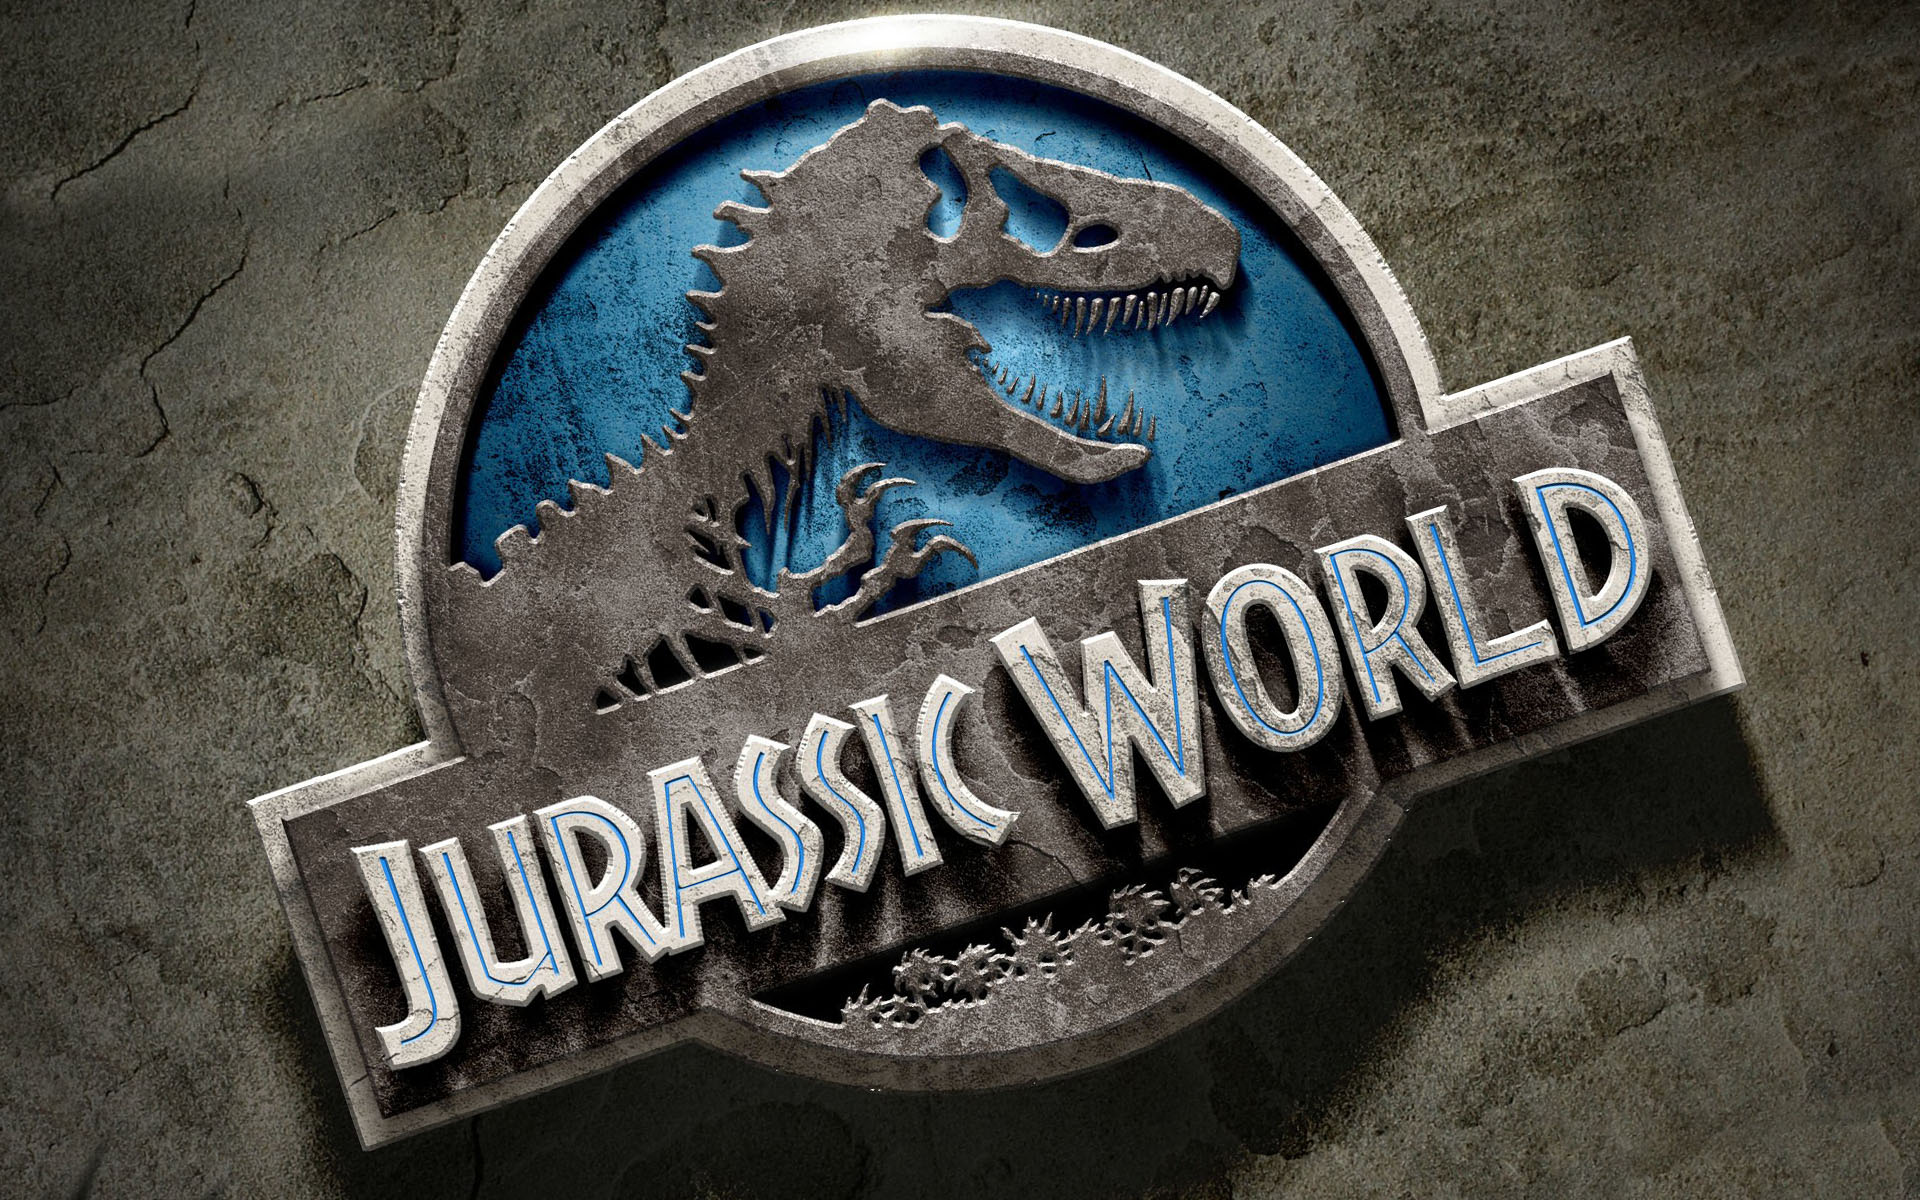 Here Is The Collection Of Jurassic World HD Wallpaper For Fans